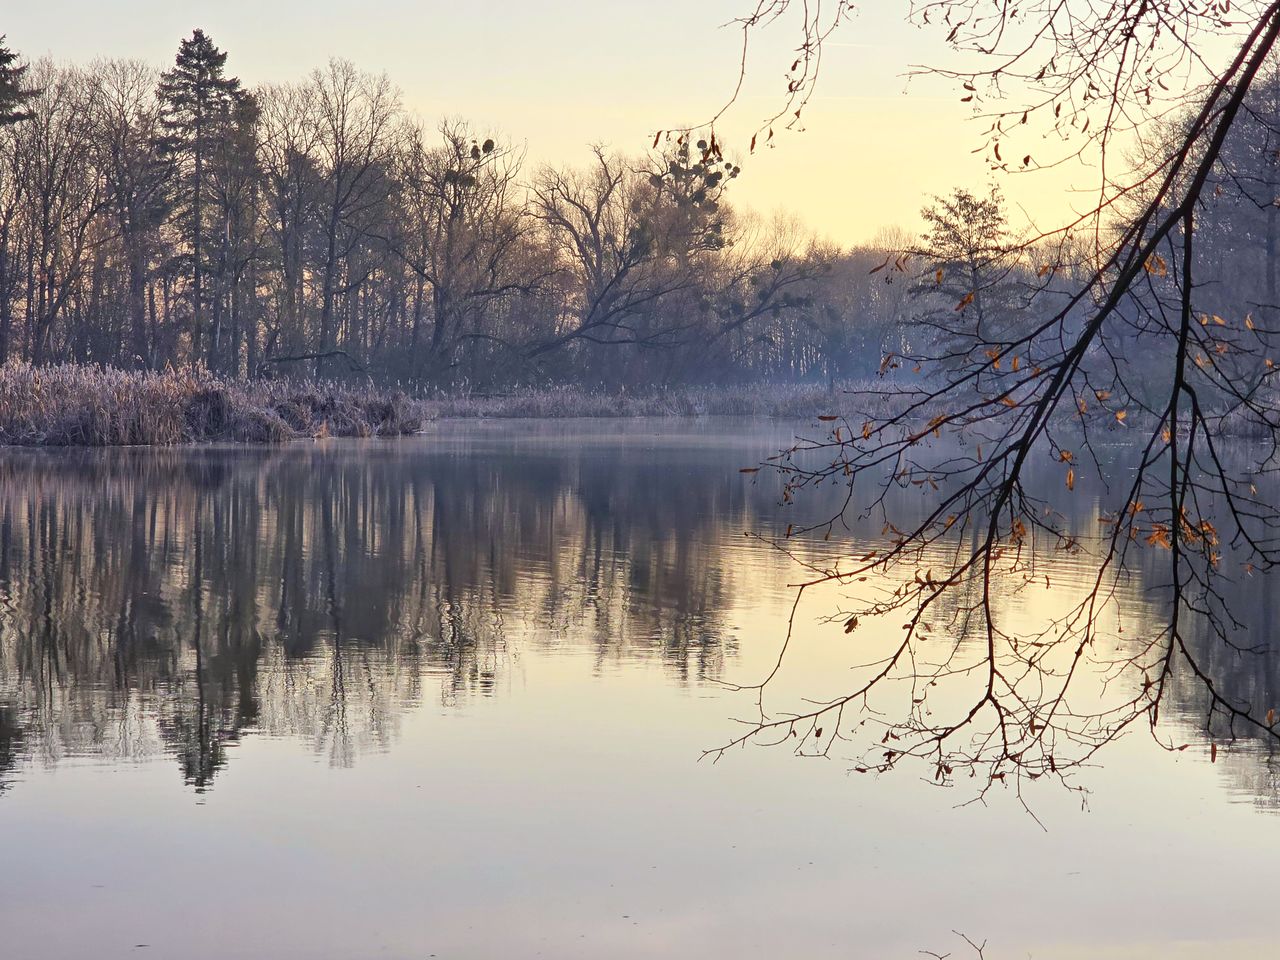 reflection, water, nature, tree, lake, morning, tranquility, beauty in nature, scenics - nature, sky, plant, winter, tranquil scene, no people, dawn, branch, landscape, environment, mist, autumn, non-urban scene, idyllic, reflection lake, forest, fog, outdoors, travel destinations, sunrise, sun, land, bare tree, tourism, cloud, standing water, twilight, beach